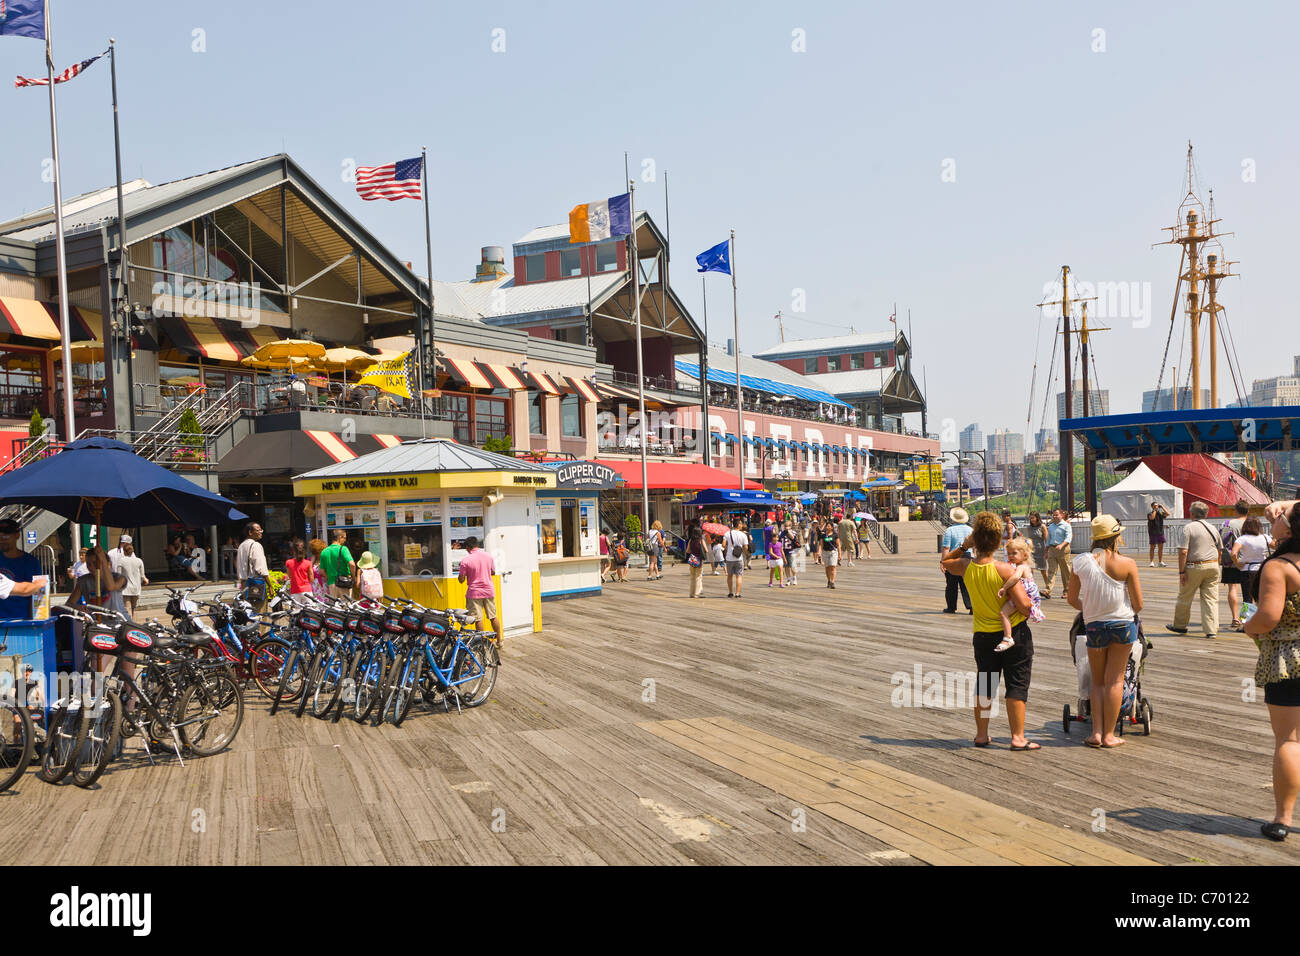 South Street Seaport Historic District in New York City Stockfoto